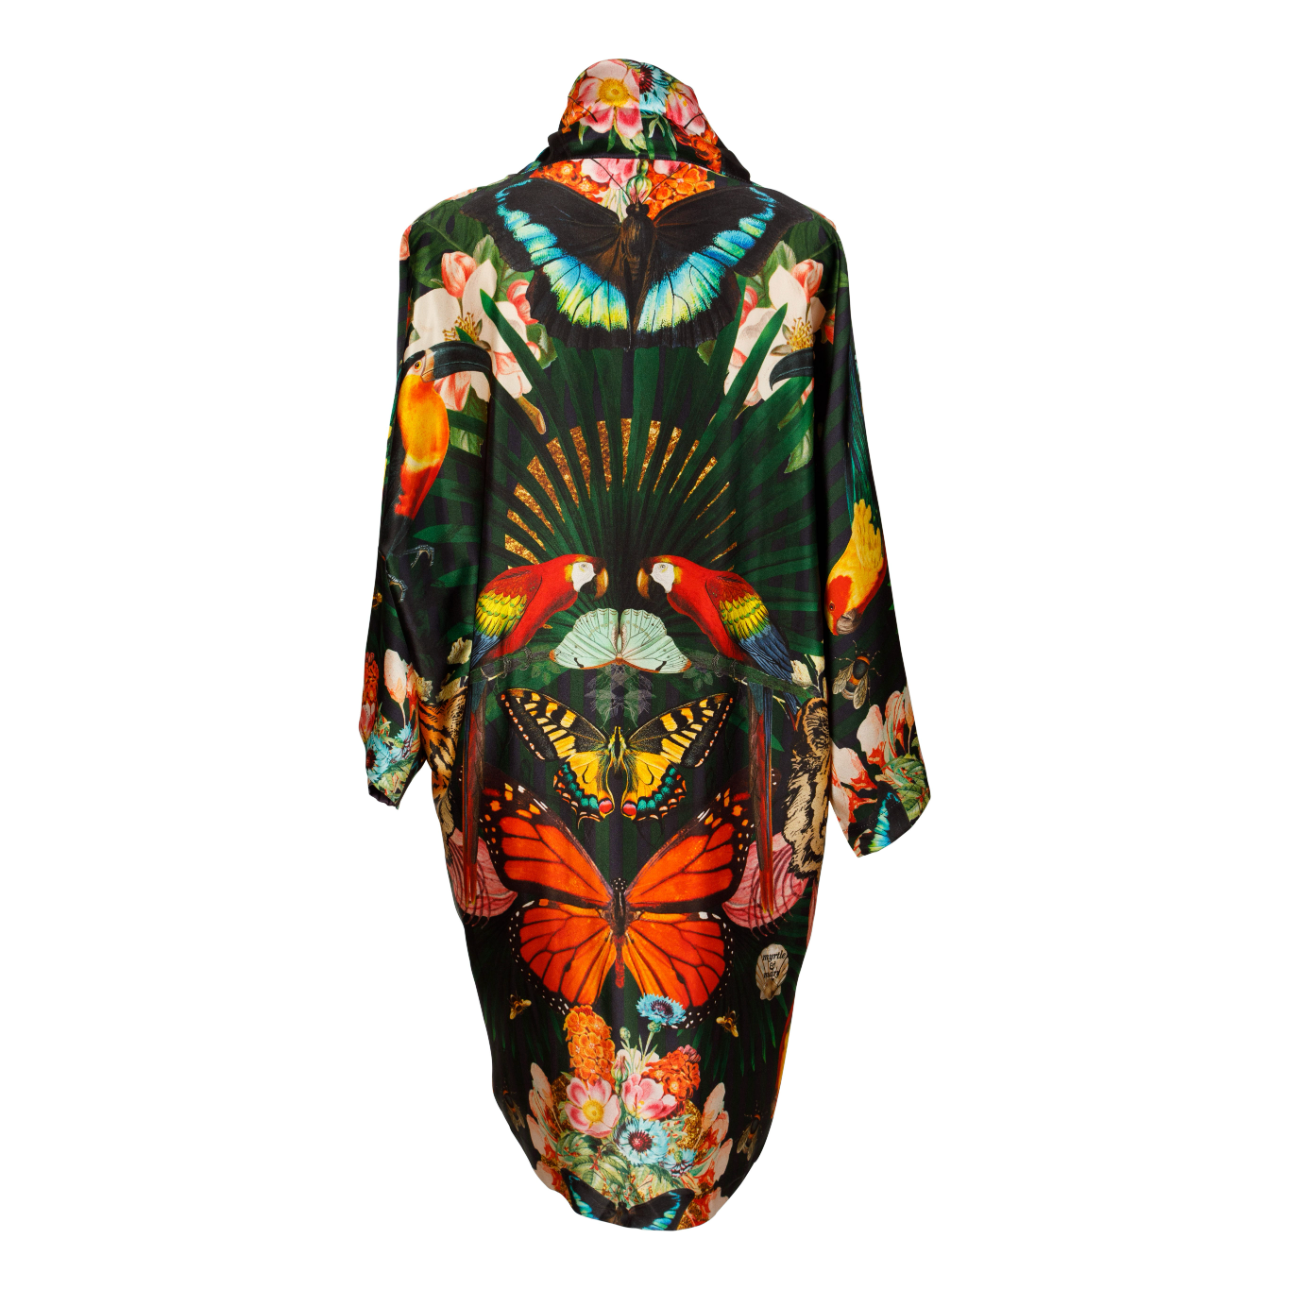 A back view of luxury 100% silk Kimono in a maximalist tropical inspired design against a dark background